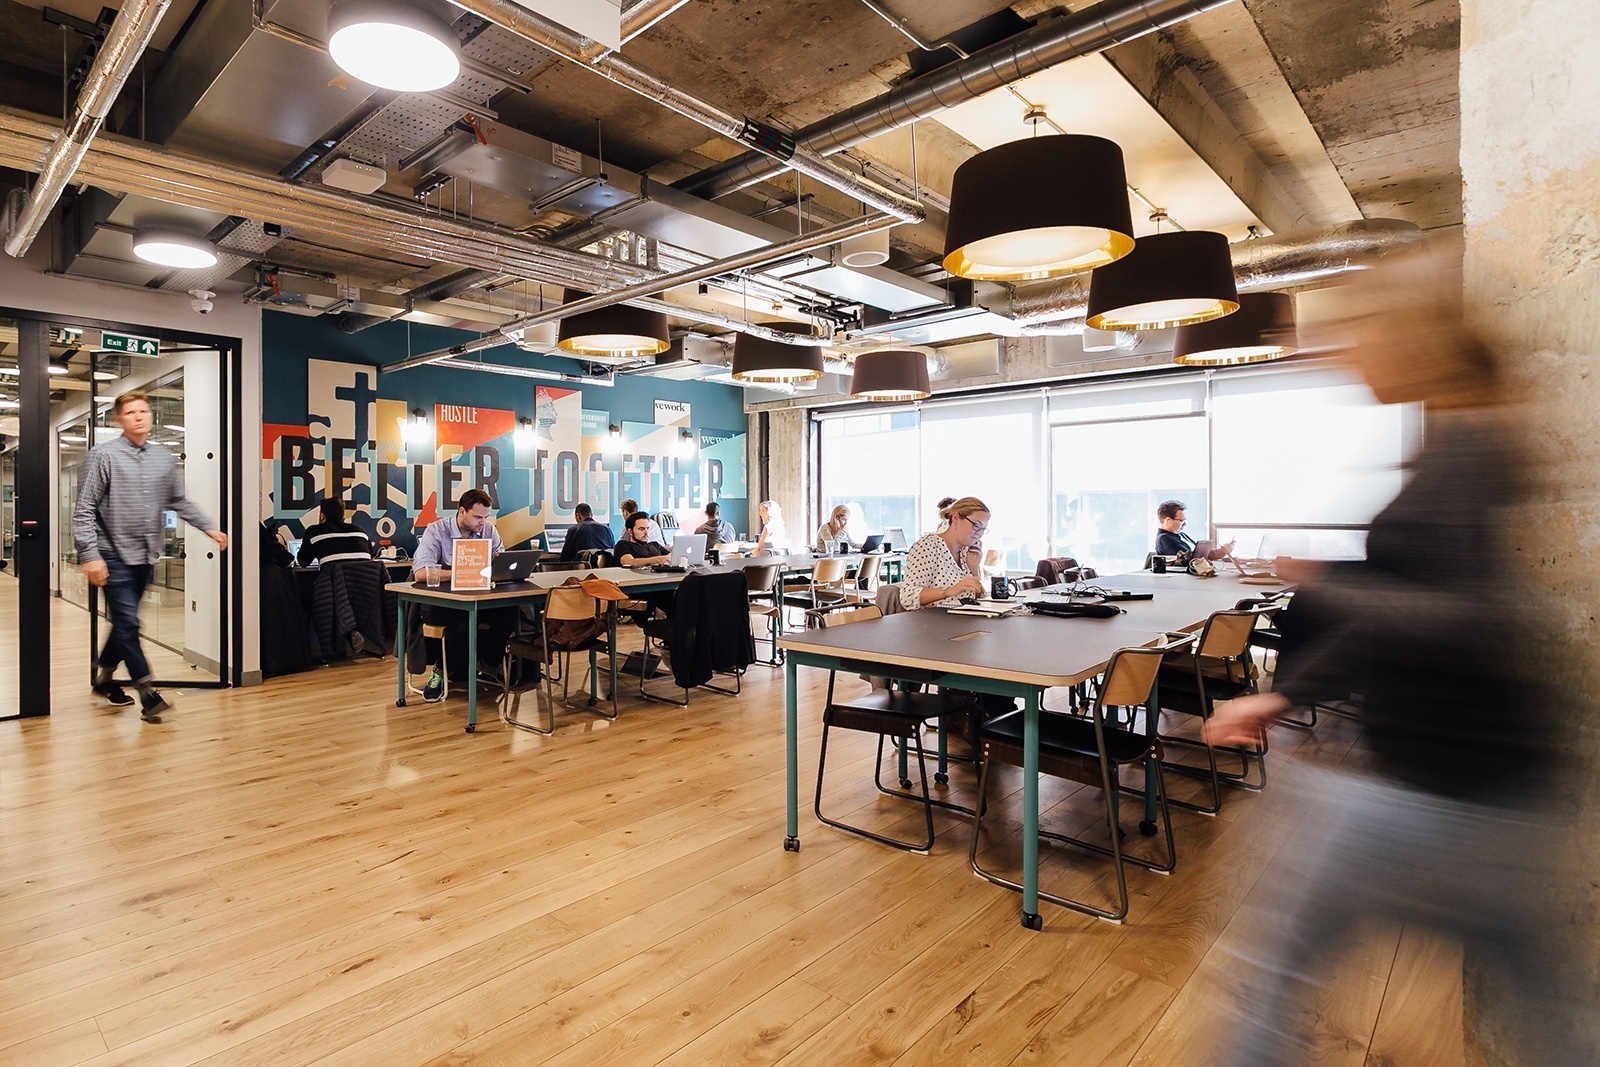 Inside WeWork’s Trendy Coworking Space in Devonshire Square - Officelovin'